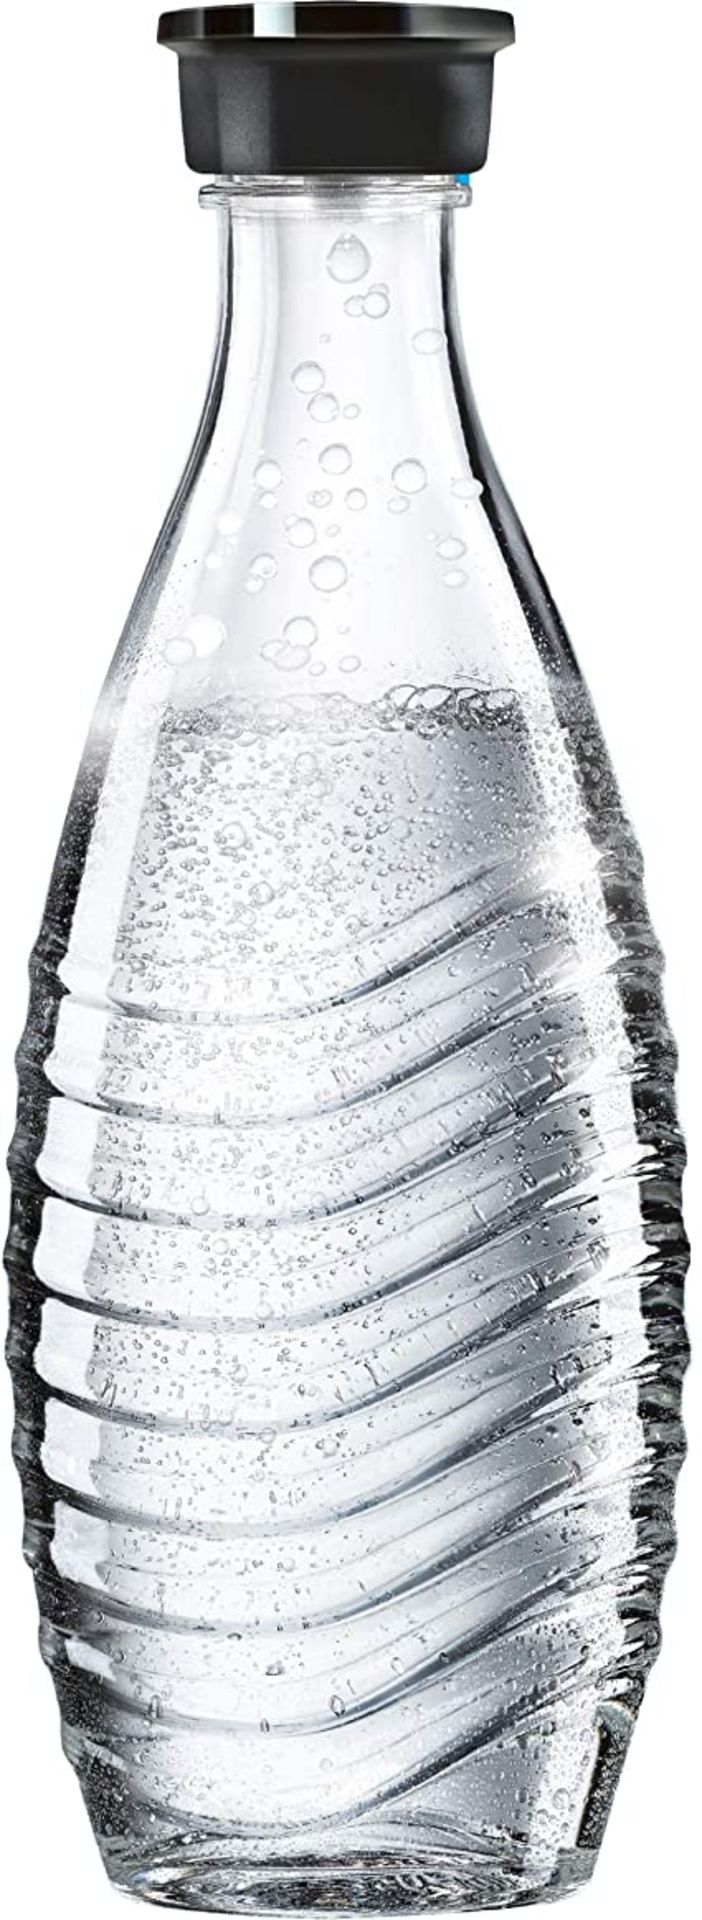 RRP - £11.00 sodaStream 600 ml Resuable Glass Carafe for Crystal Sparkling Water